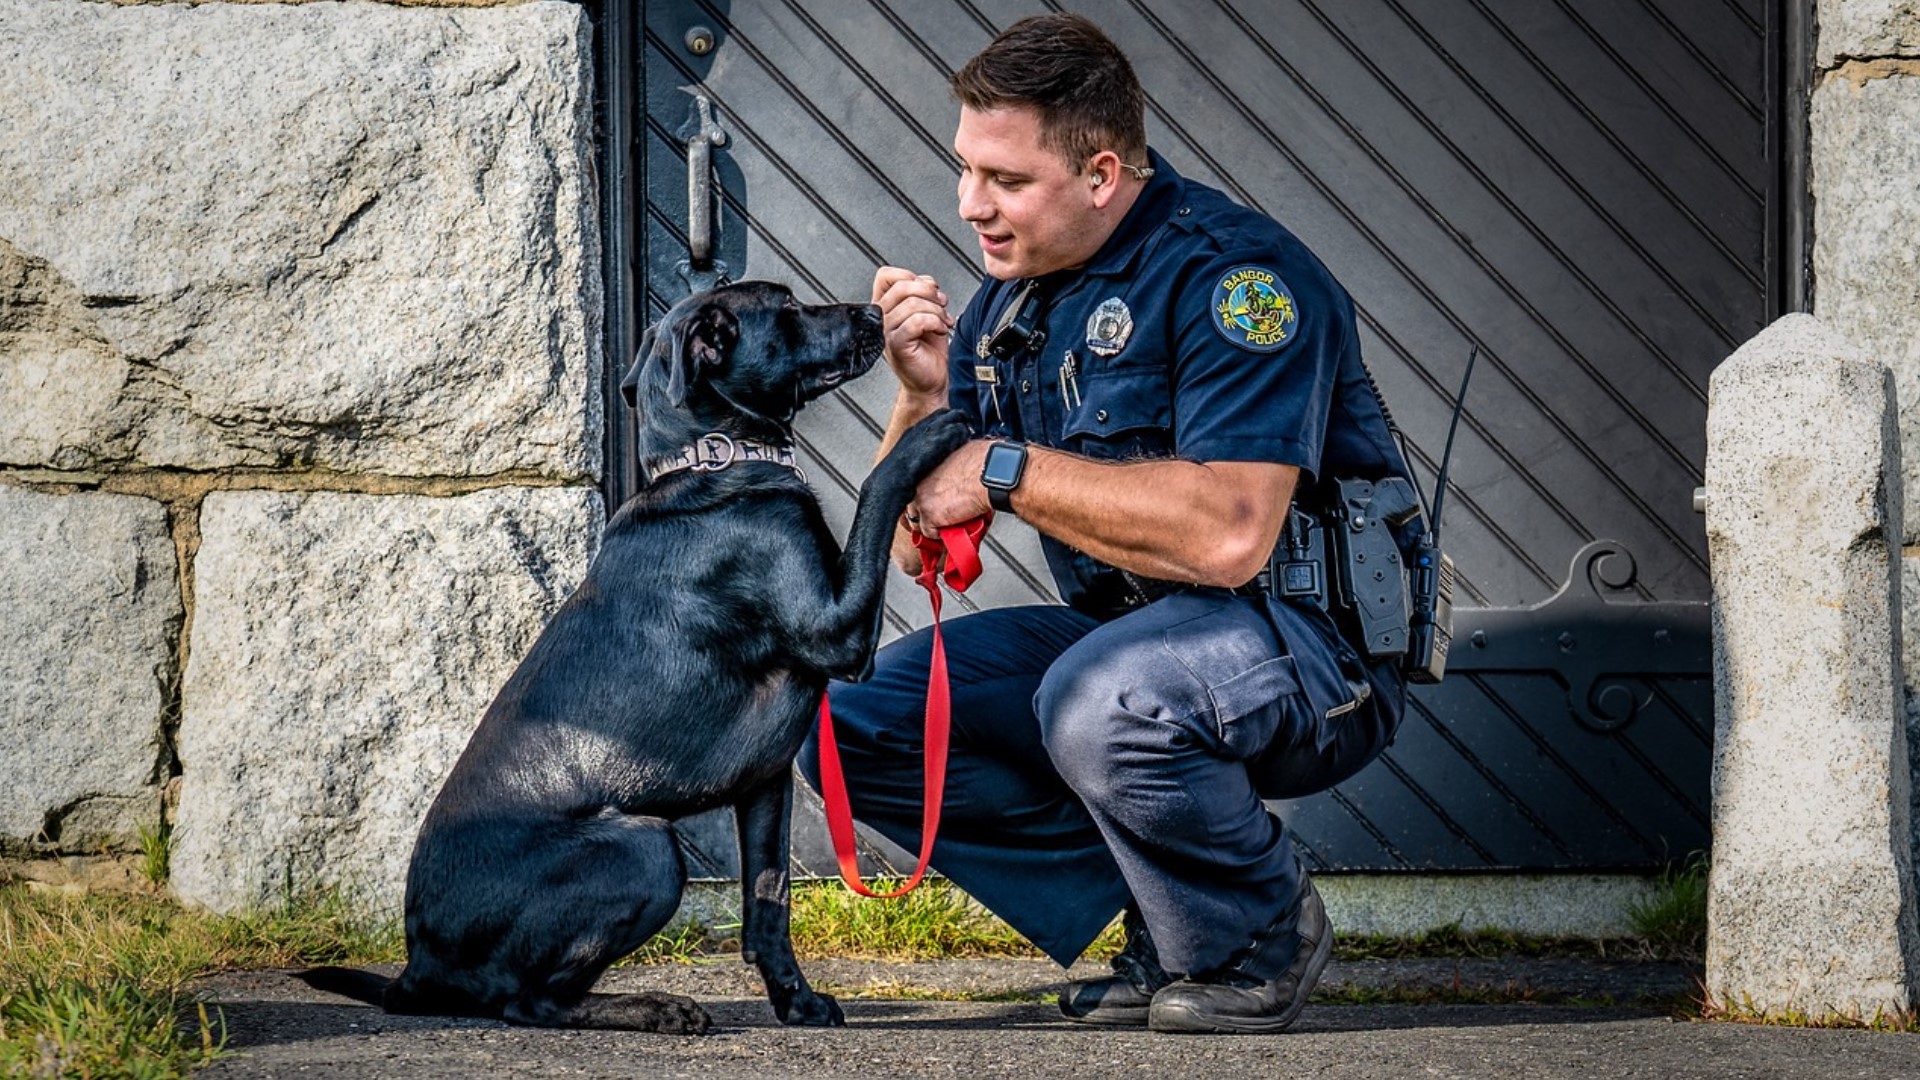 Bangor PD poses with pets for 2021 calendar